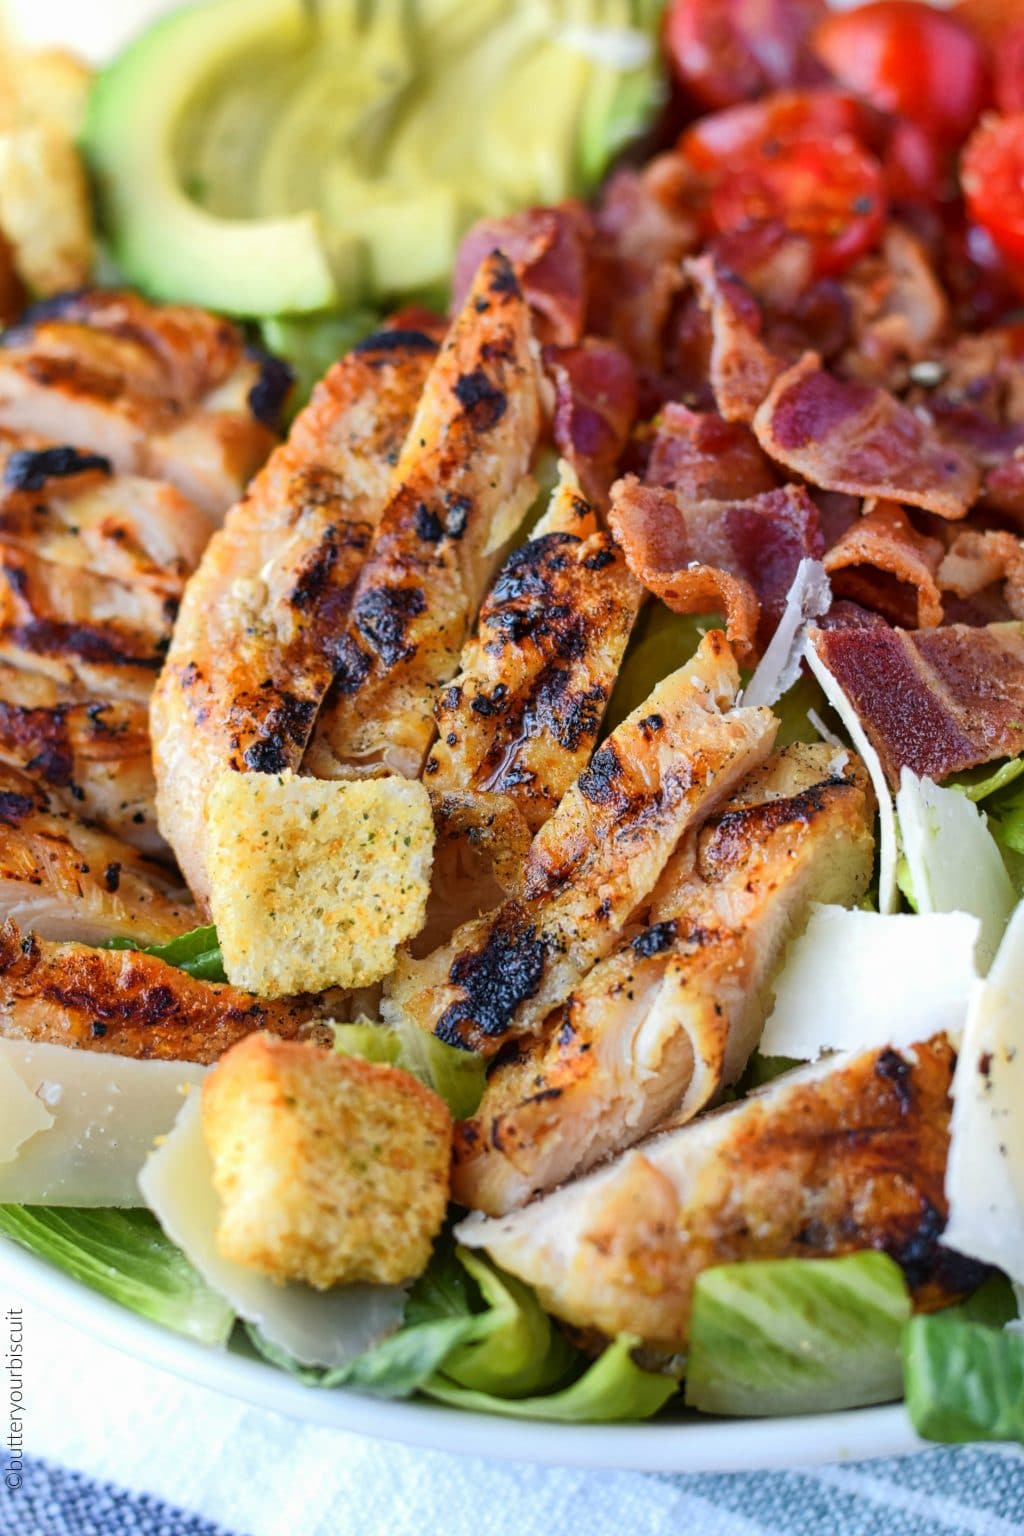 grilled chicken on the salad